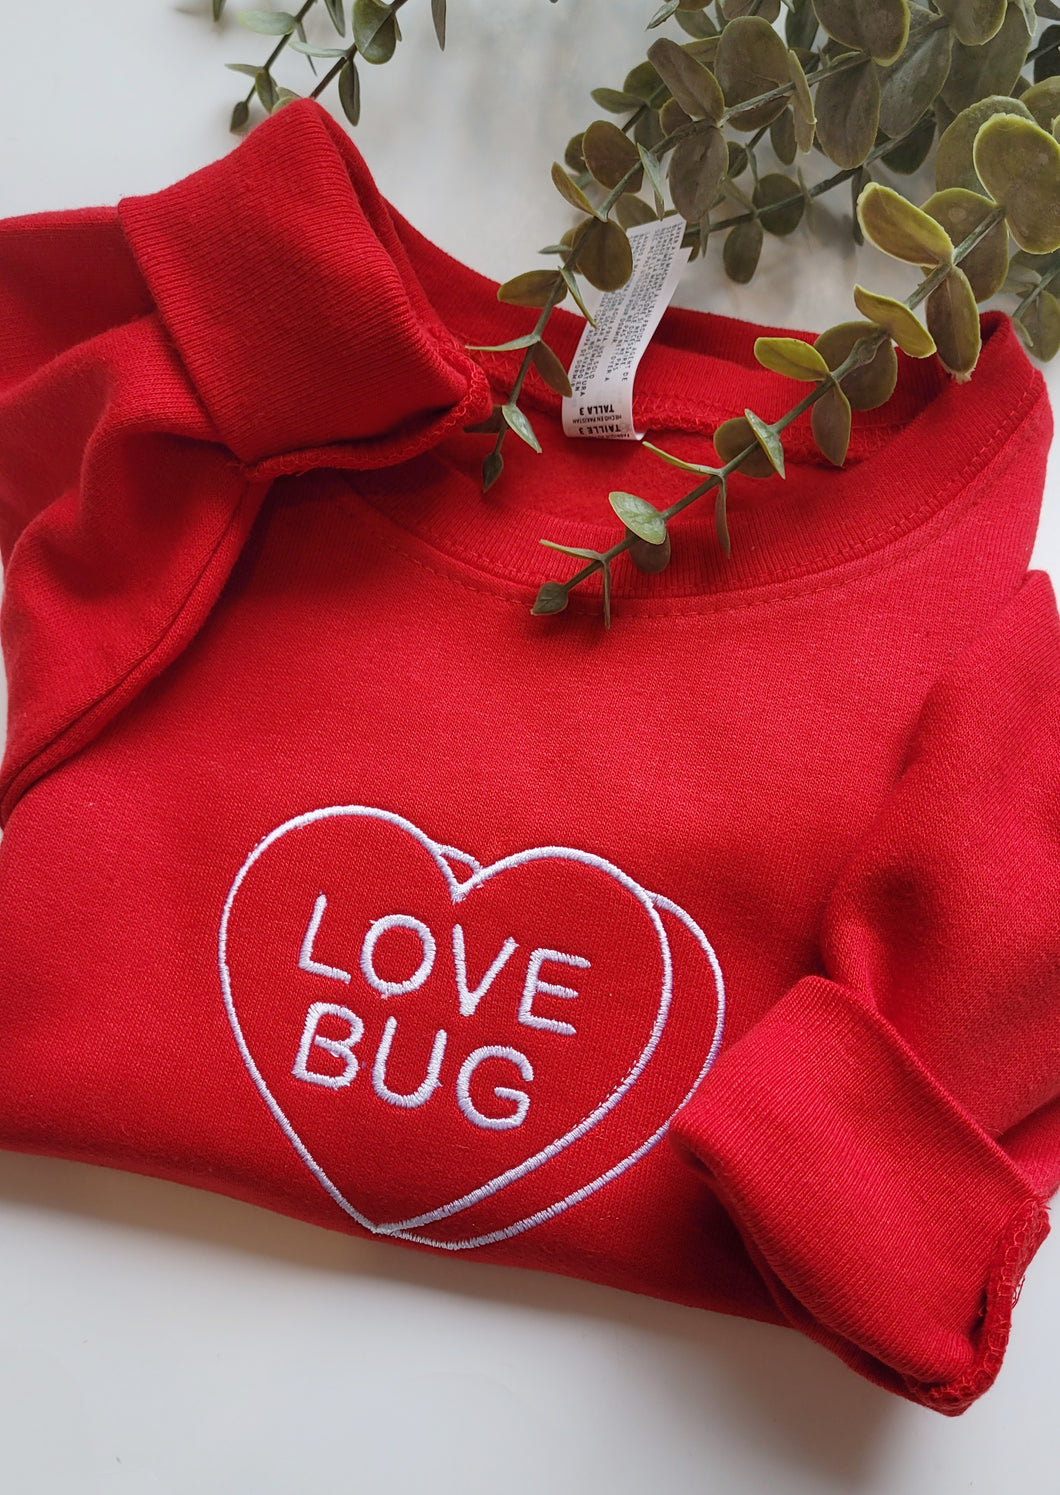 Love bug embroidered sweater - Toddler/Youth